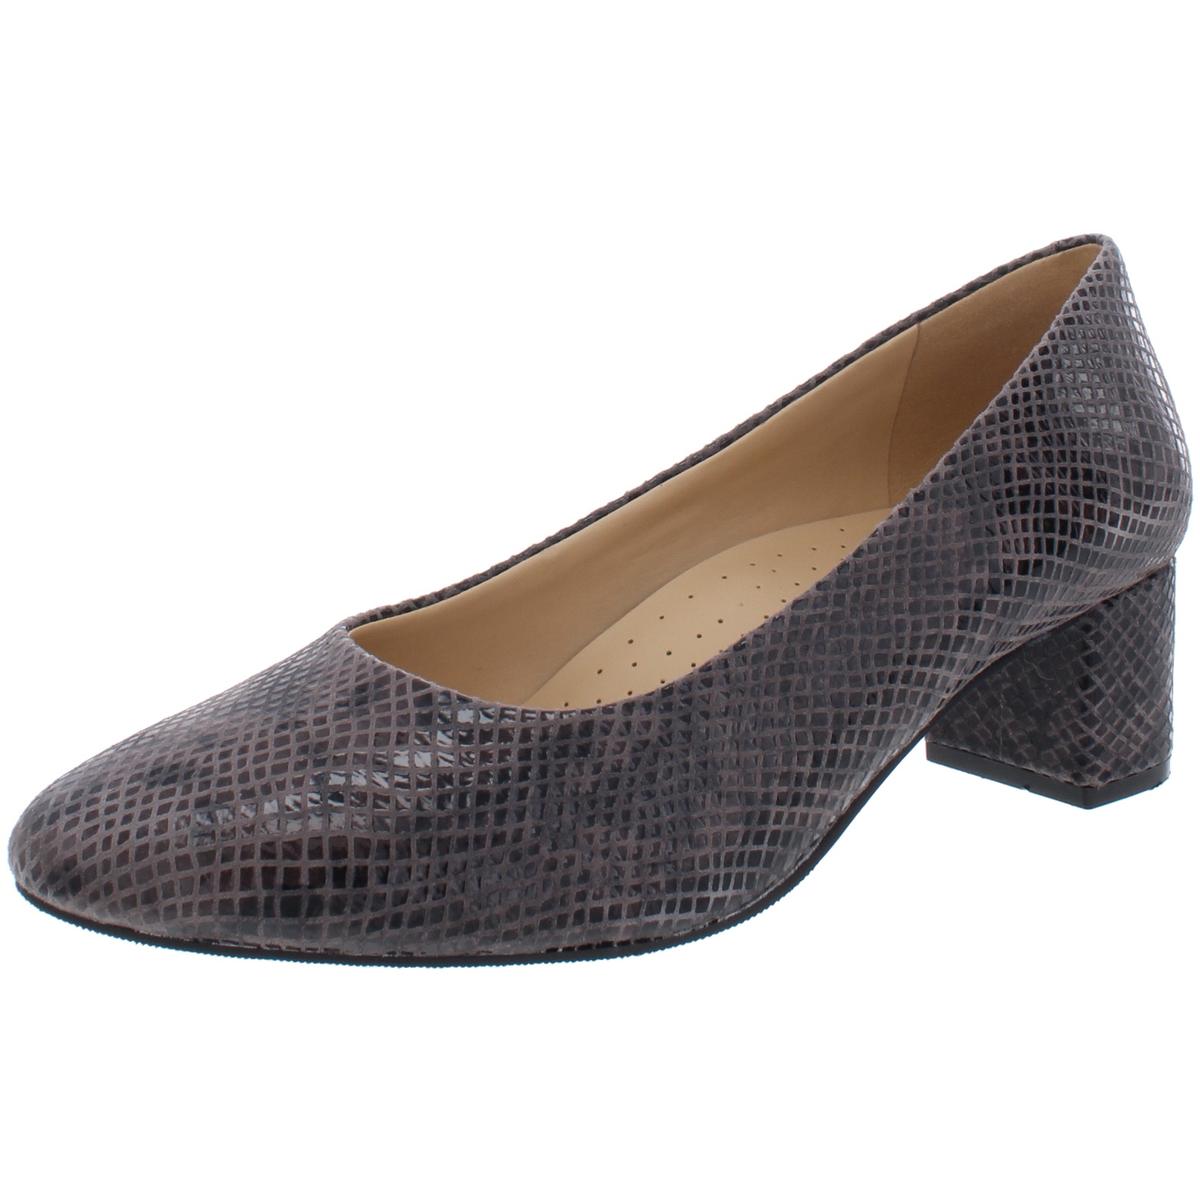 Trotters Womens Kari Leather Dressy Pointed Toe Heels Shoes BHFO 0004 ...